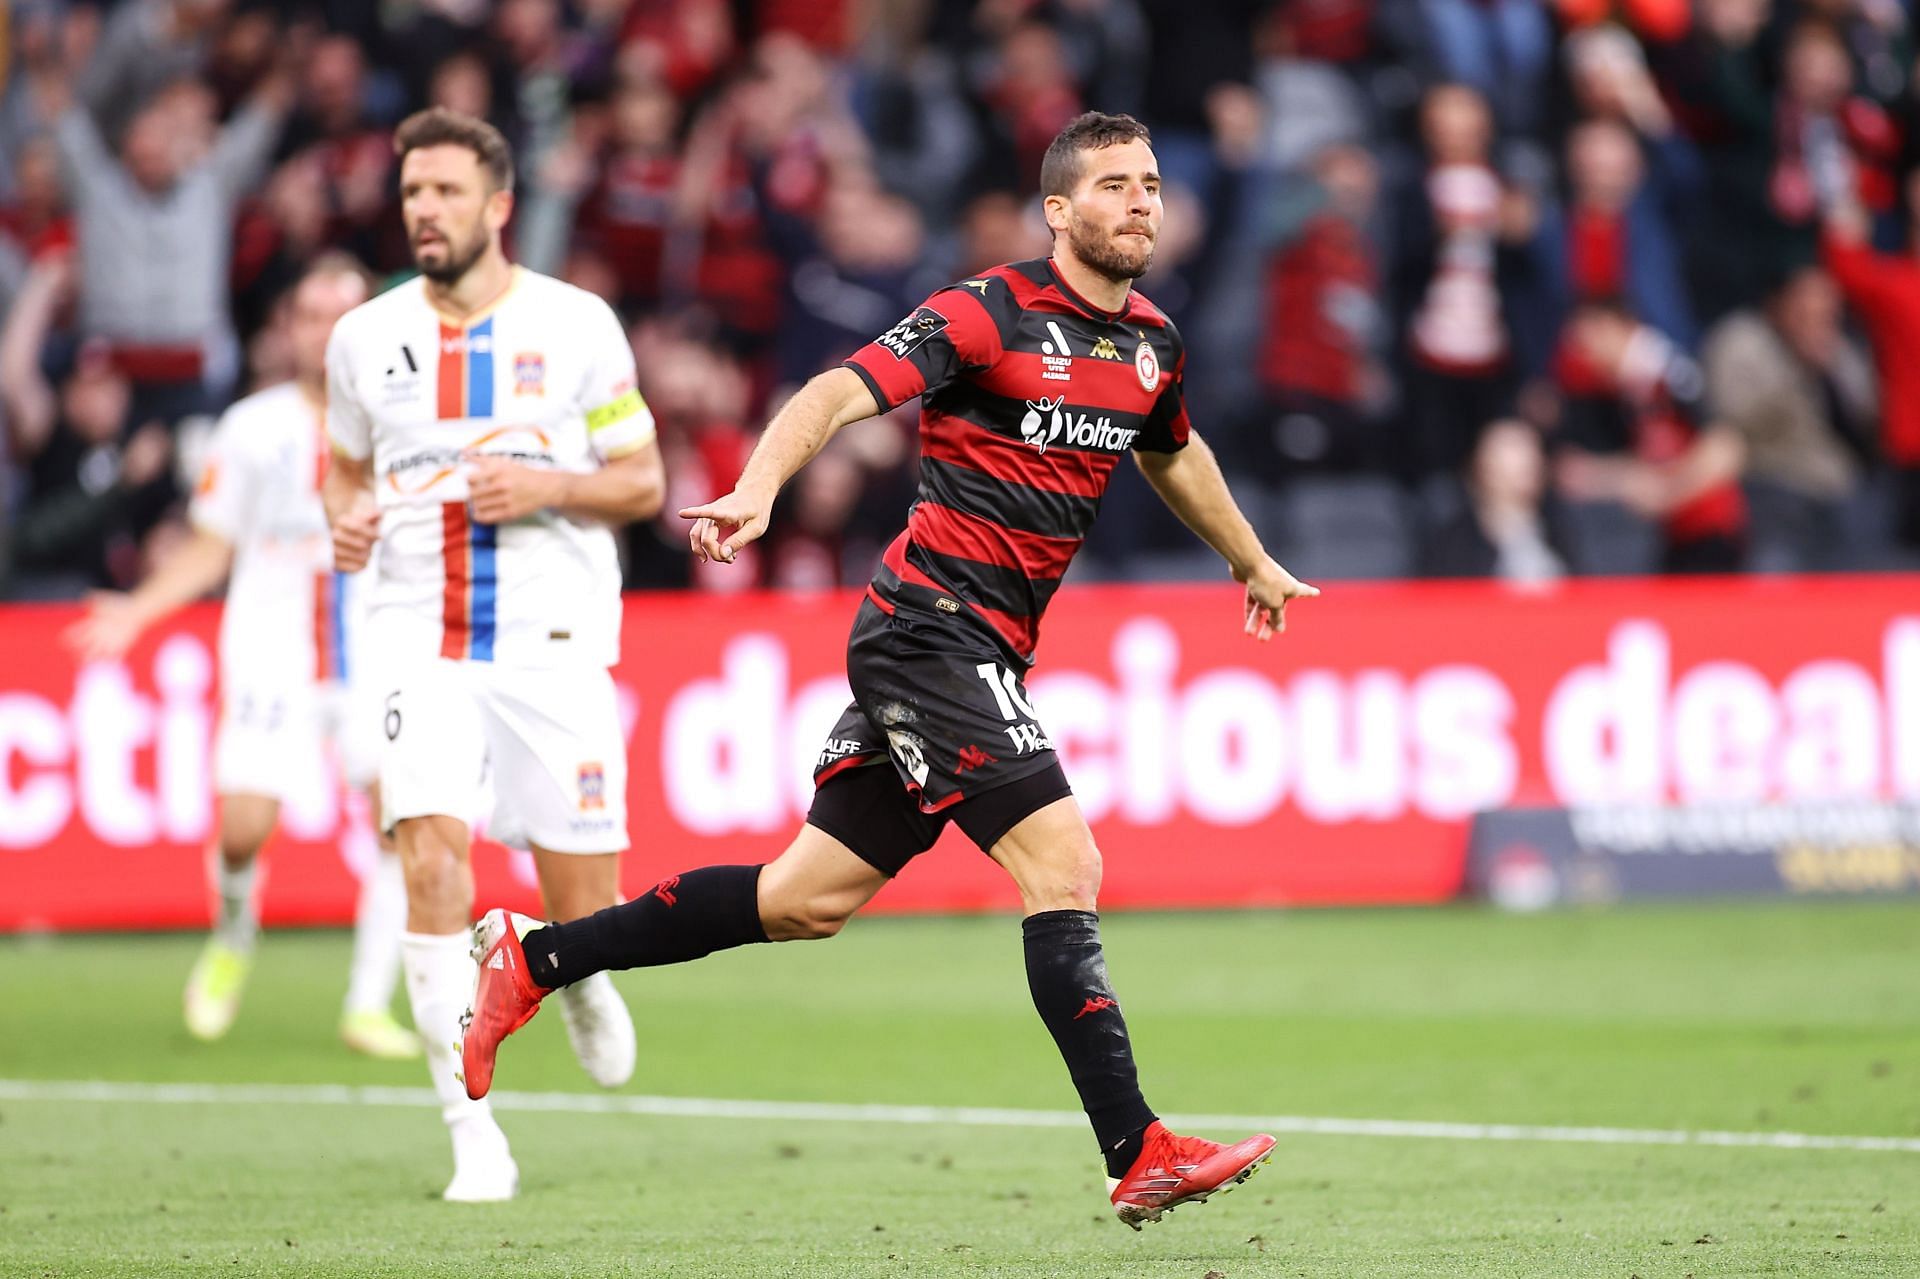 Newcastle Jets take on Western Sydney Wanderers this weekend